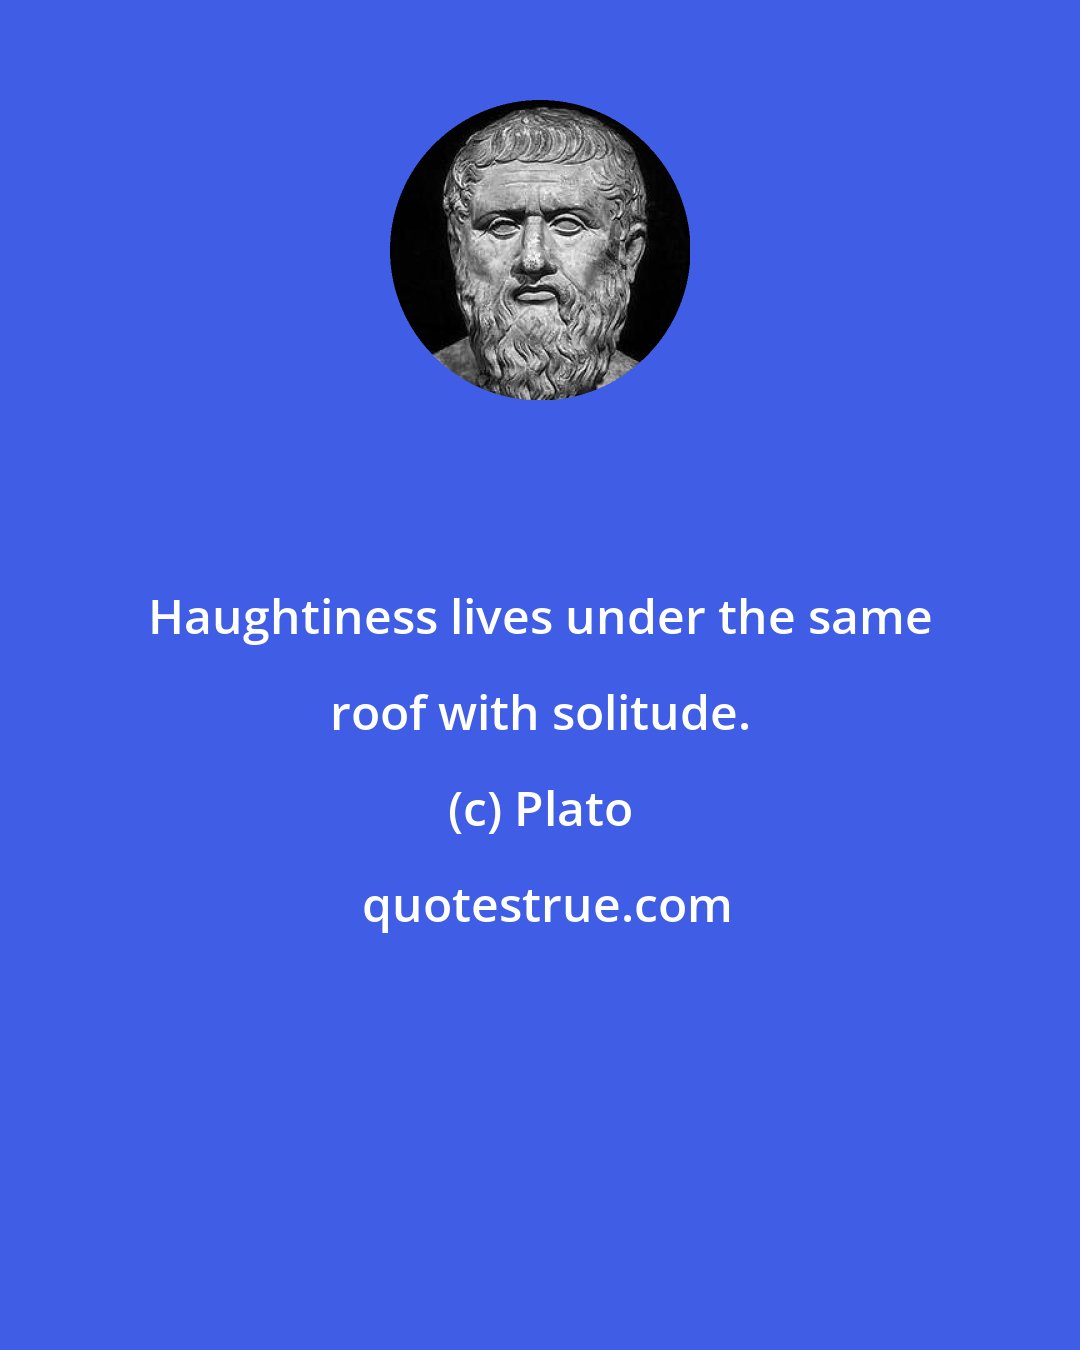 Plato: Haughtiness lives under the same roof with solitude.